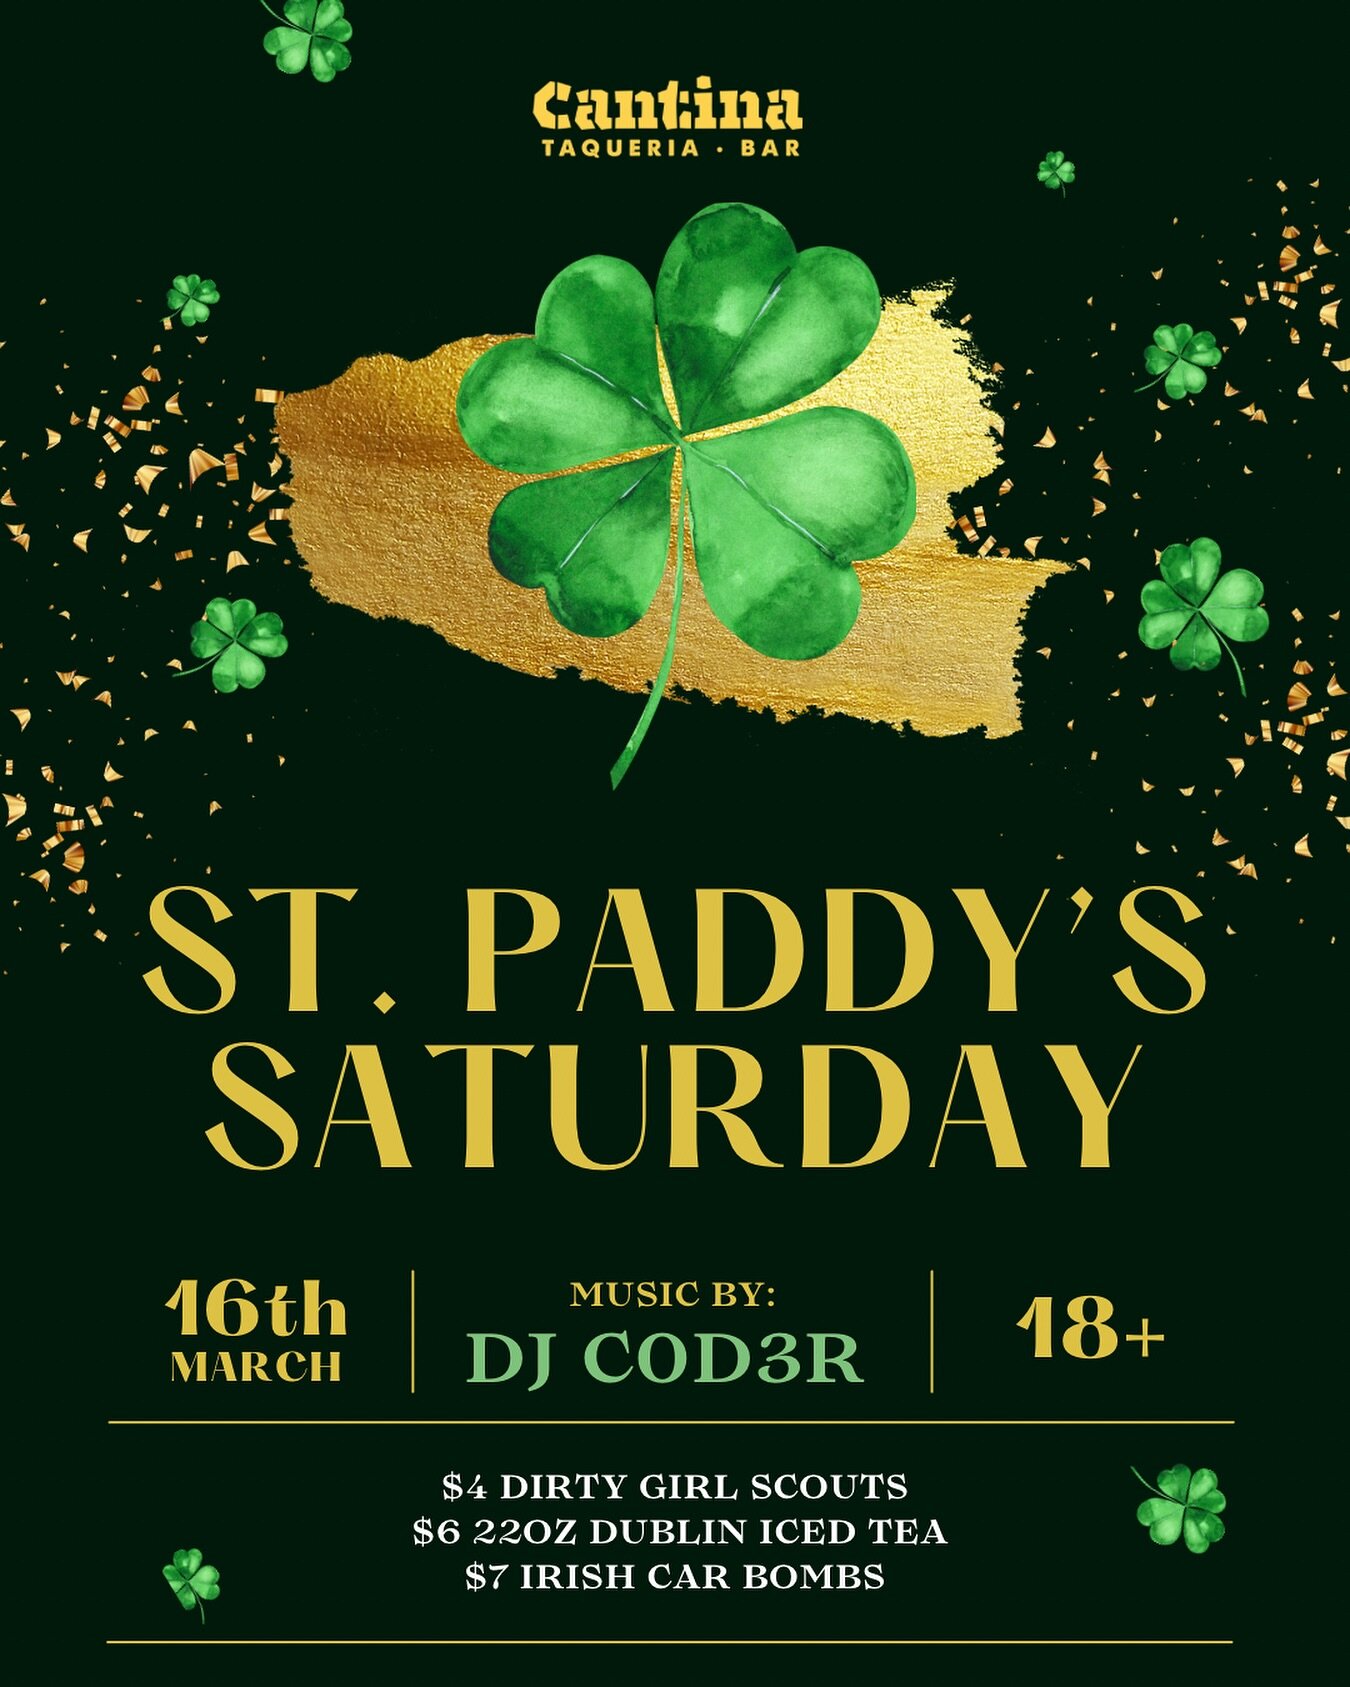 Celebrating St. Paddy&rsquo;s Saturday! We&rsquo;ll be open at 6pm with drink specials and green swag.

Feat. DJ C0D3R 10pm-2am

Get Lucky ☘️